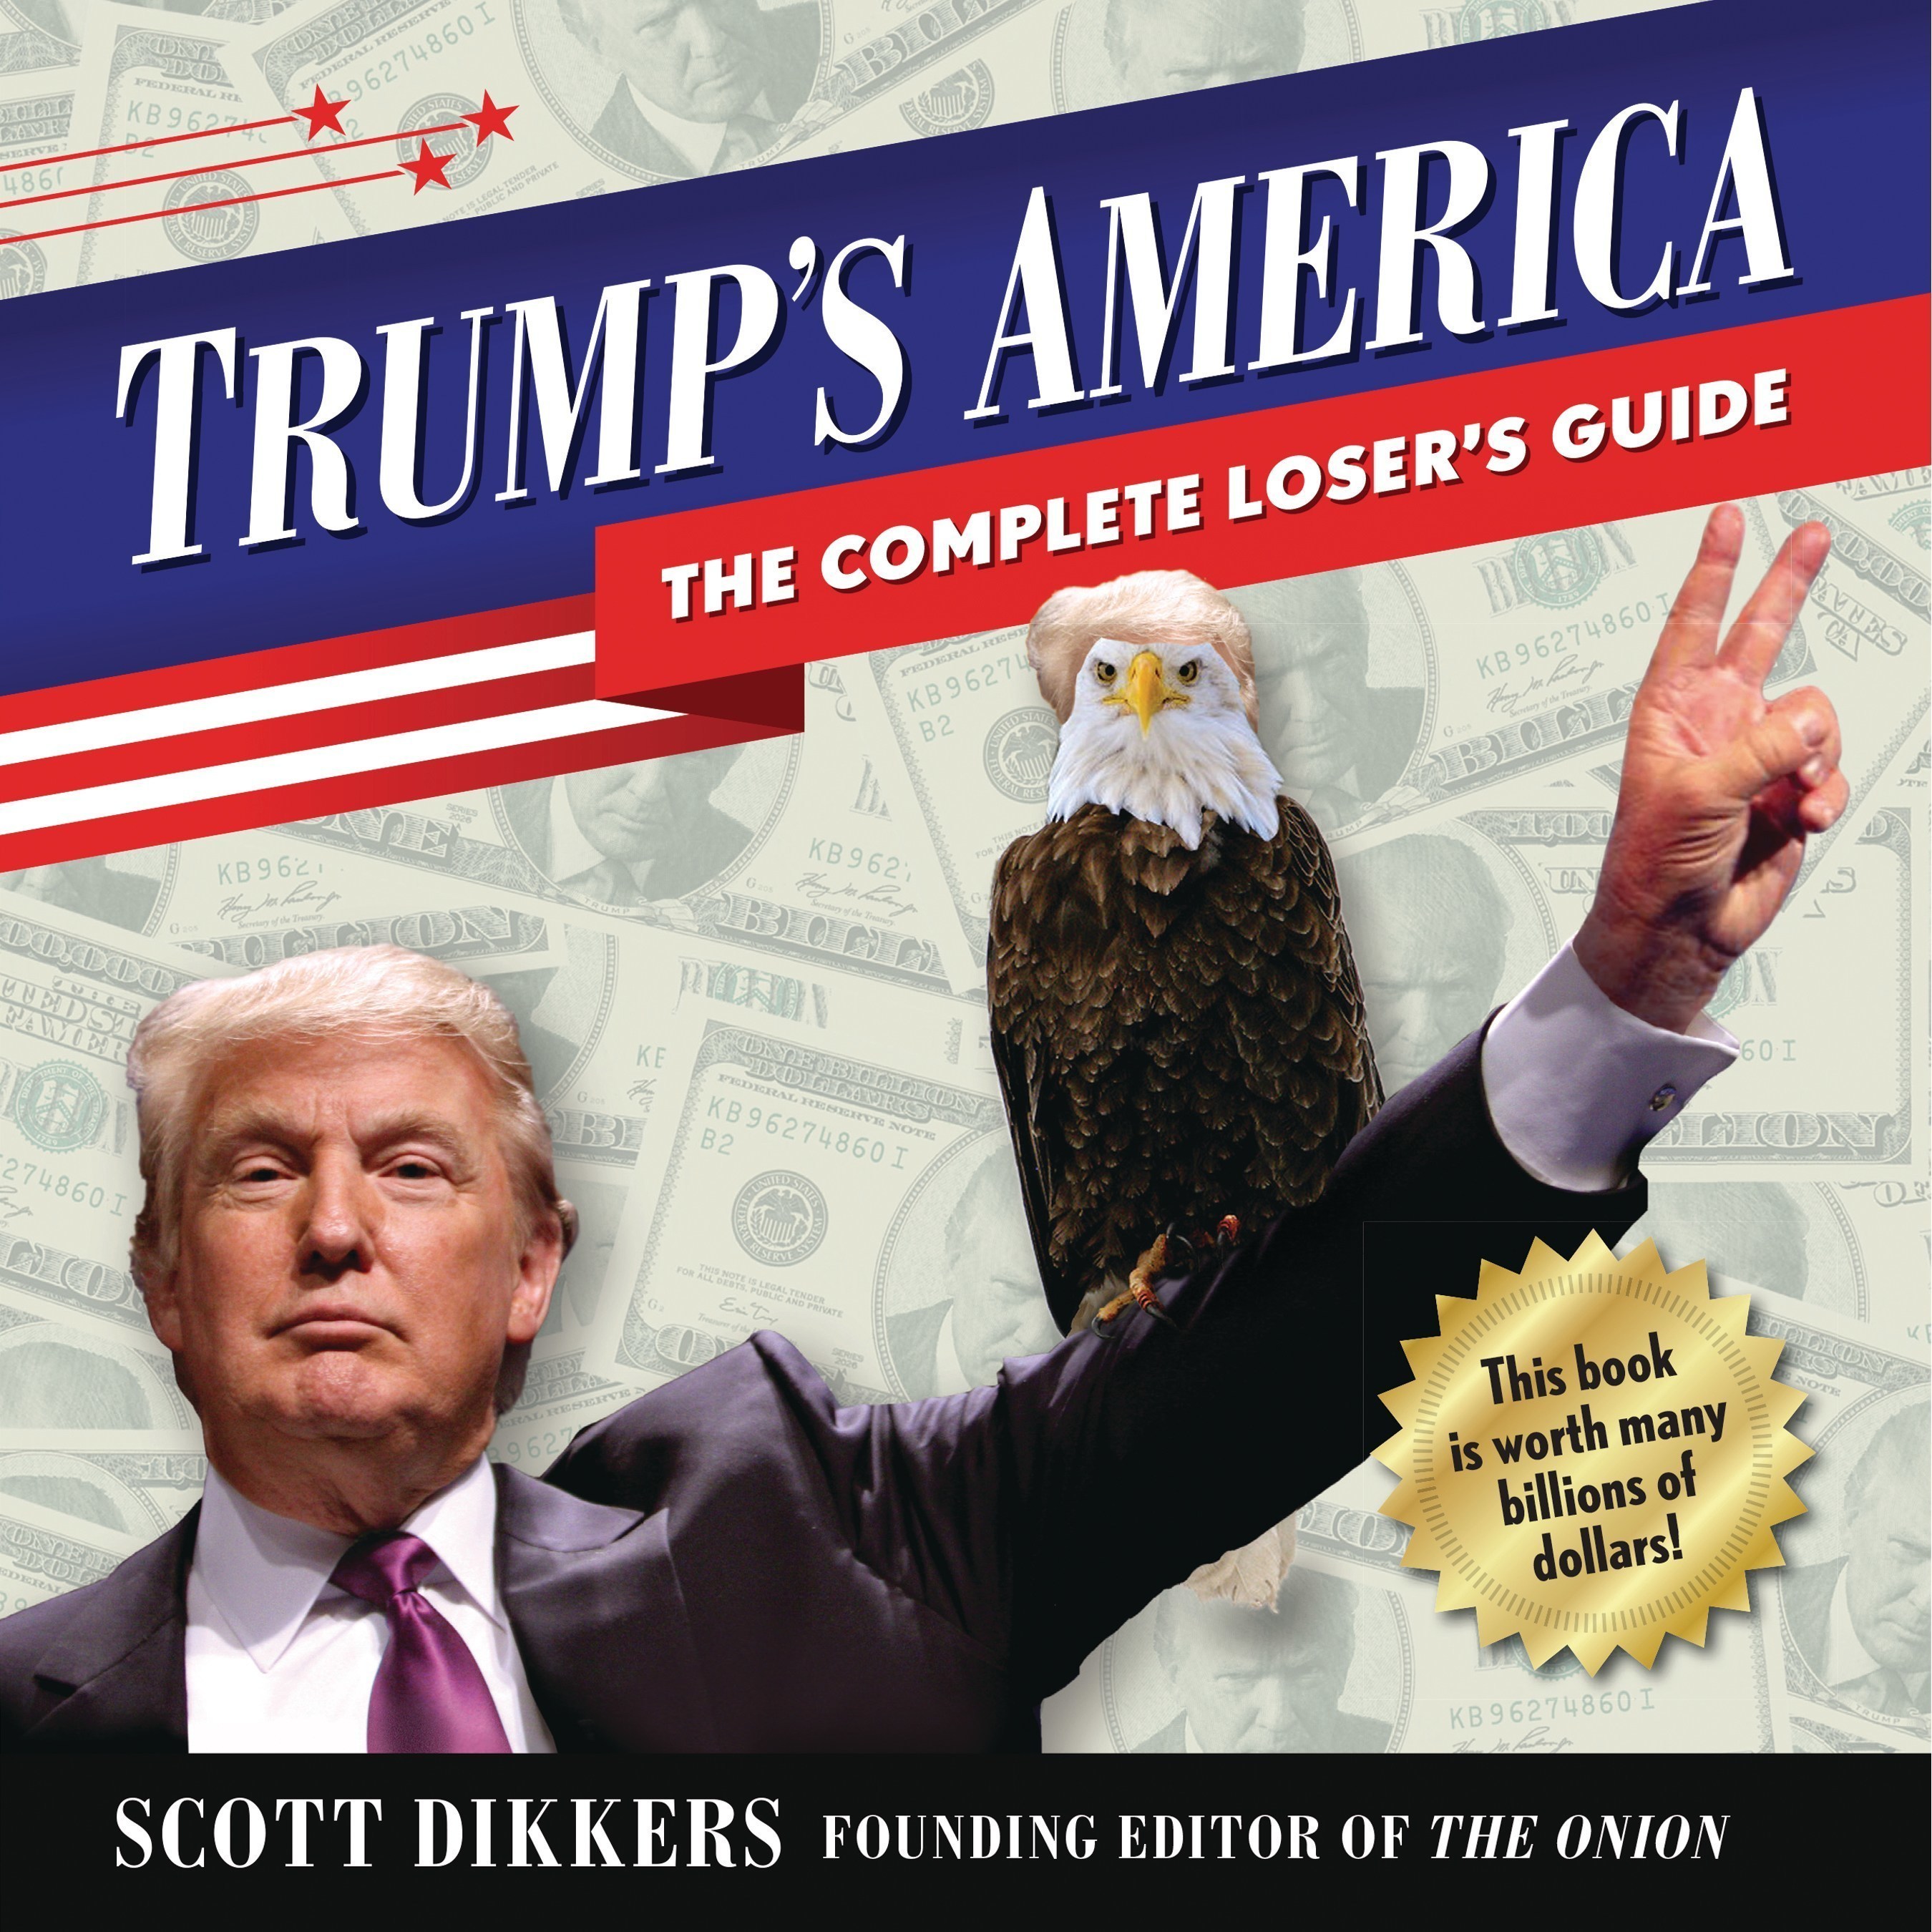 New book by Onion Founder Scott Dikkers to prepare for a Trumpocalypse. Trump's America The Complete Loser's Guide.